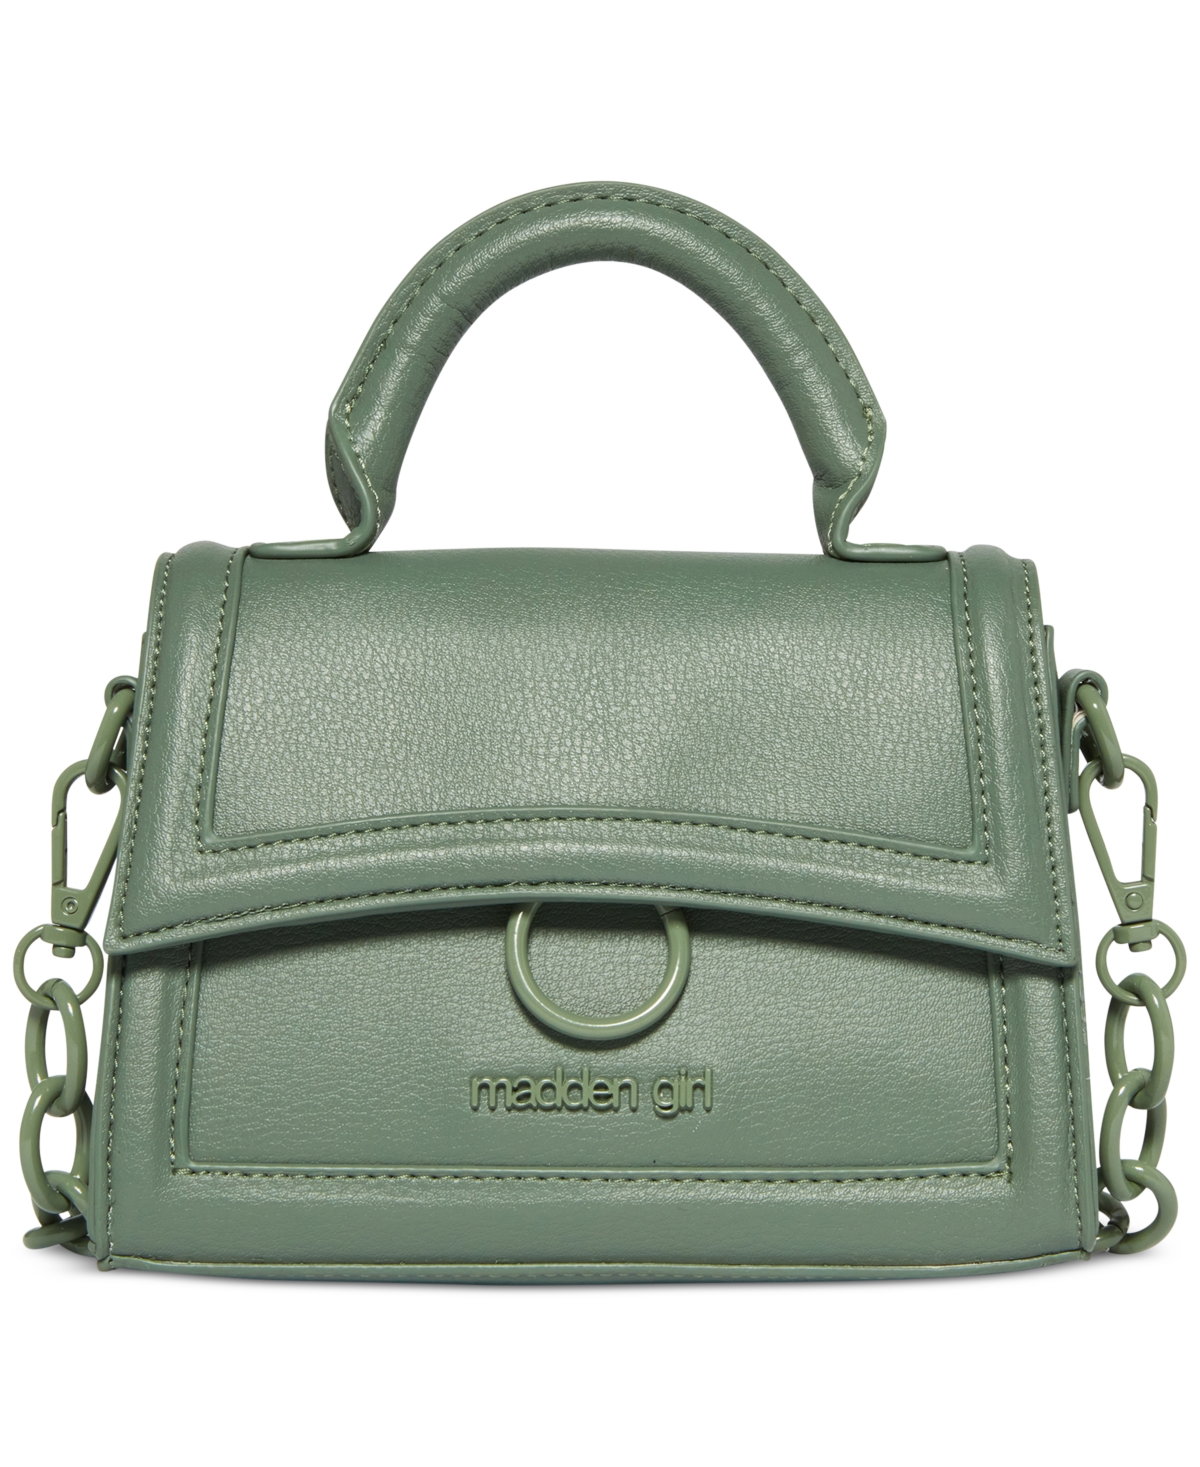 Madden Girl Erin Small Top Handle Bag In Sage